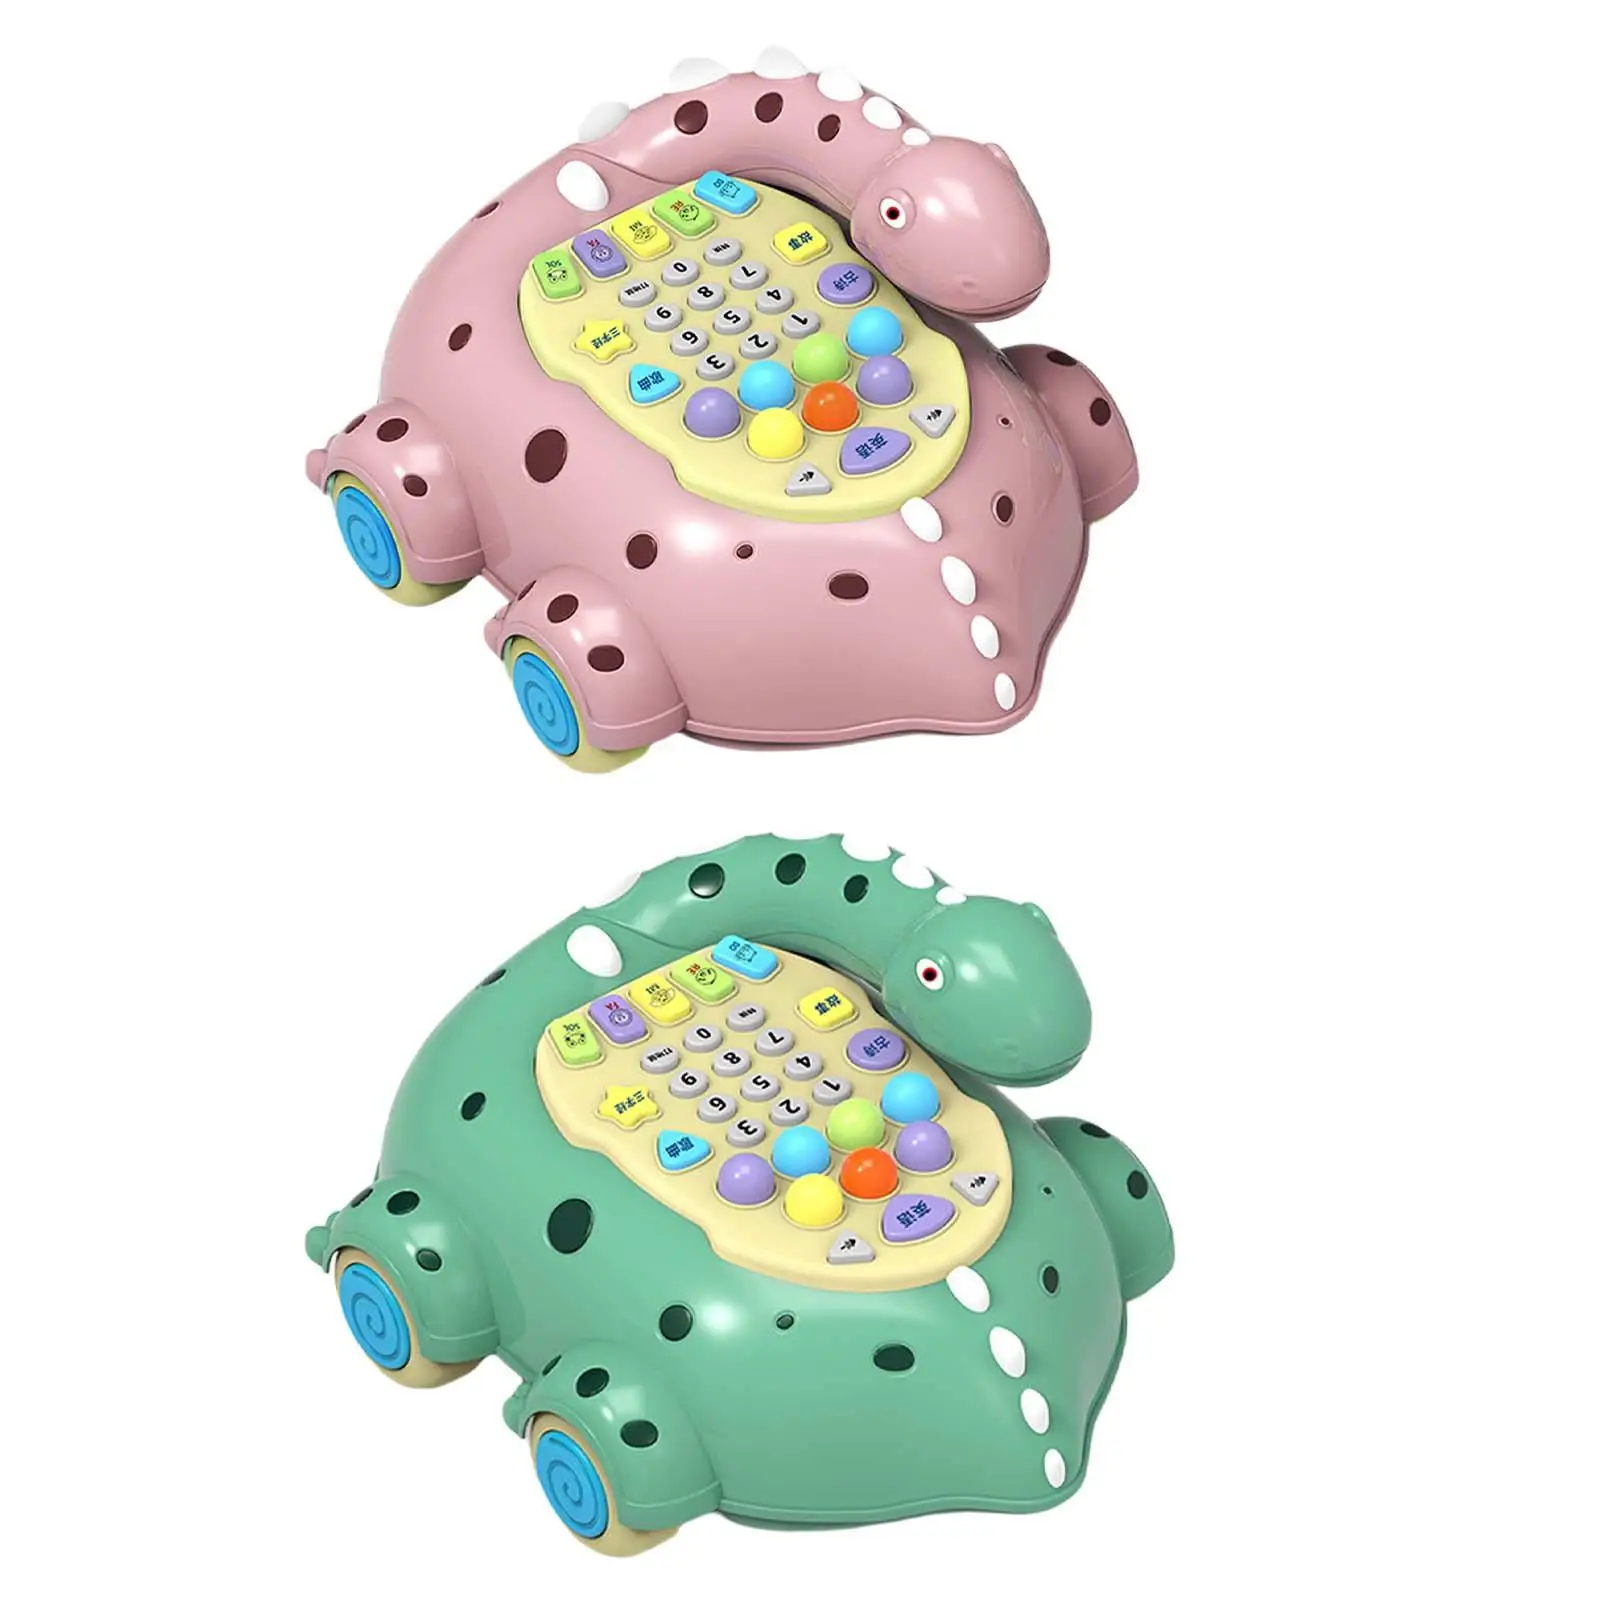 

Children Phone Toy Educational Pretend Play Fine Motor Skills Baby Telephone Toy for Preschool Gift Activity Sensory Interaction